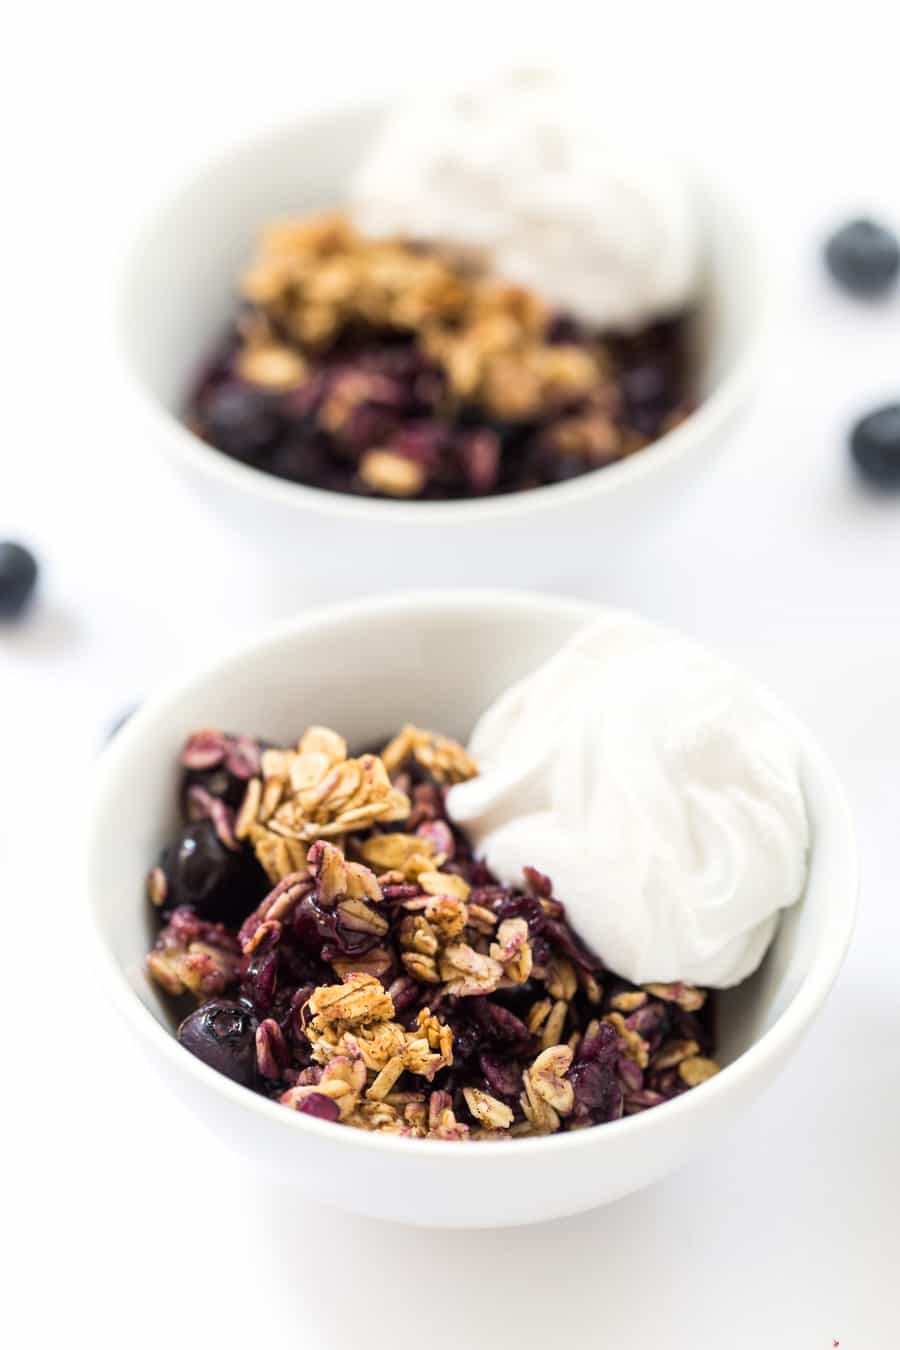 This BANANA BLUEBERRY CRUMBLE is a quick and easy summer dessert that everyone will love. It's light, healthy, vegan, and uses just 1/4 cup of sweetener!